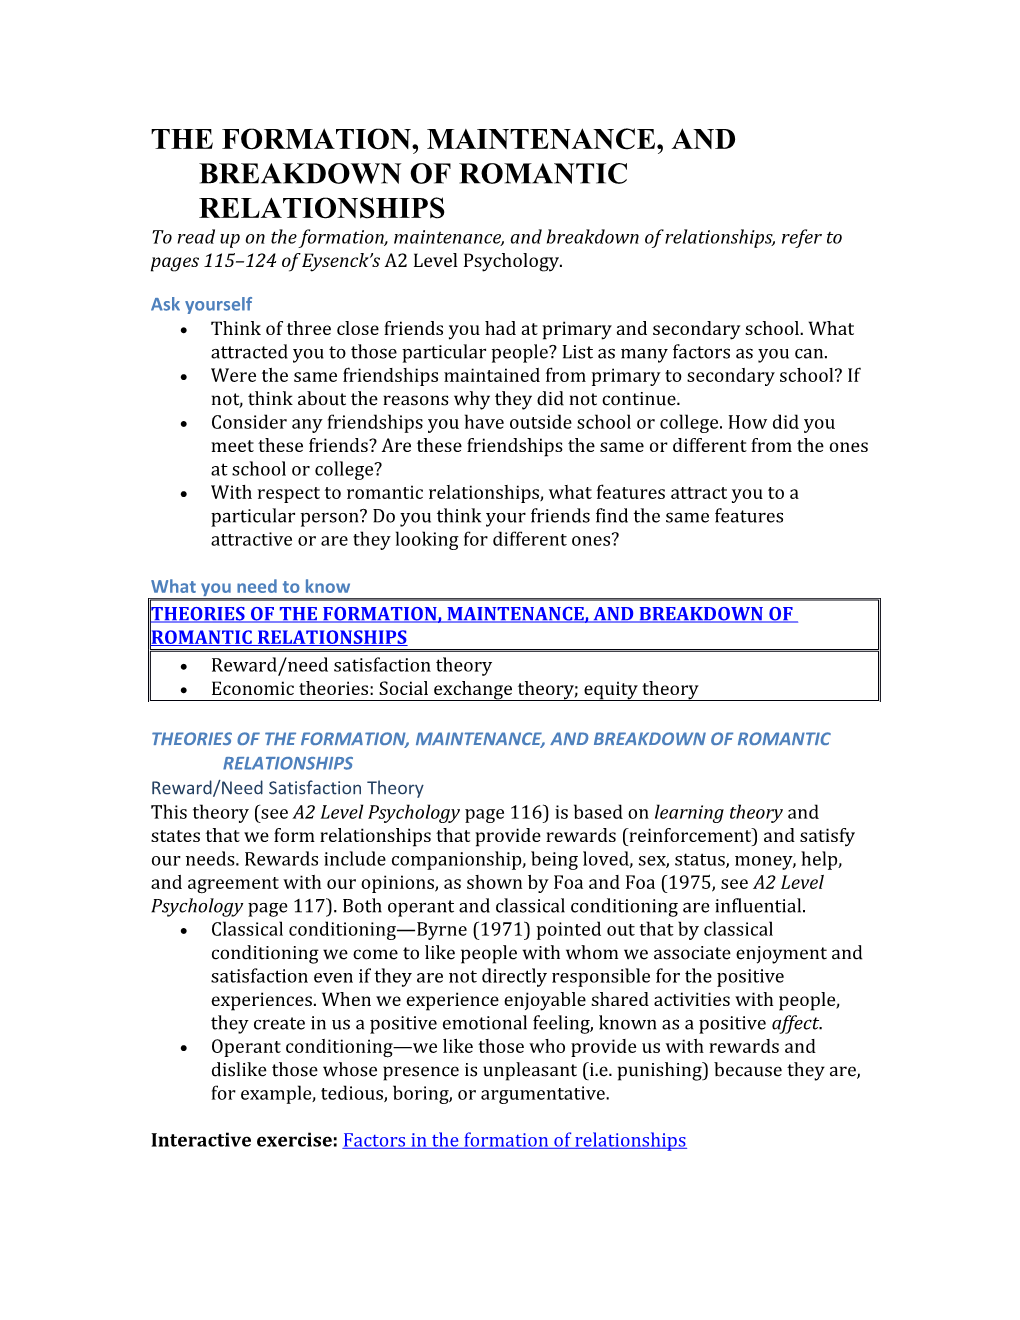 The Formation, Maintenance, and Breakdown of Romantic Relationships